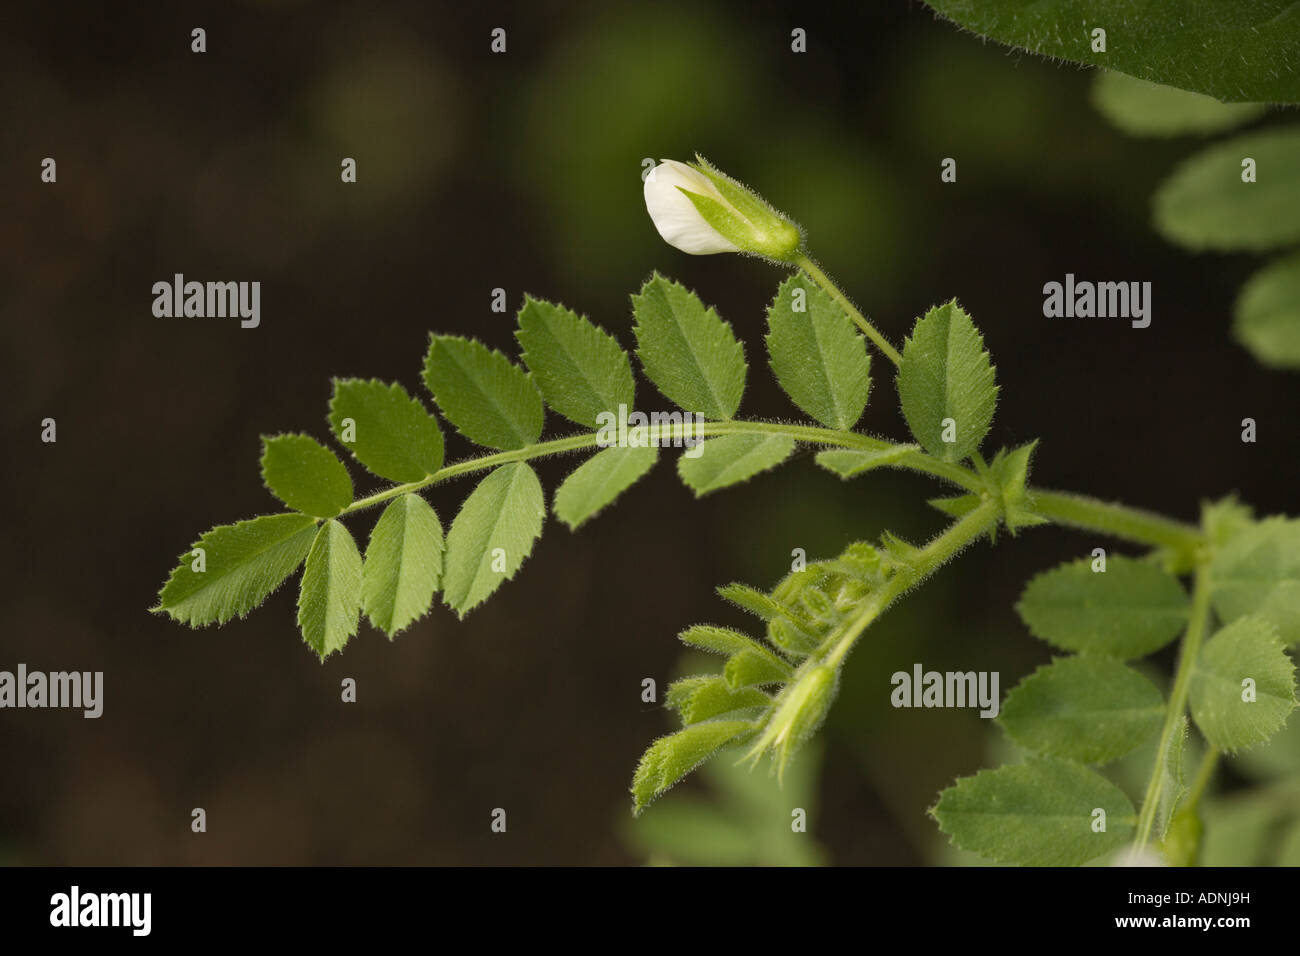 Chick pea (Cicer arietinum ) in flower, close-up Stock Photo